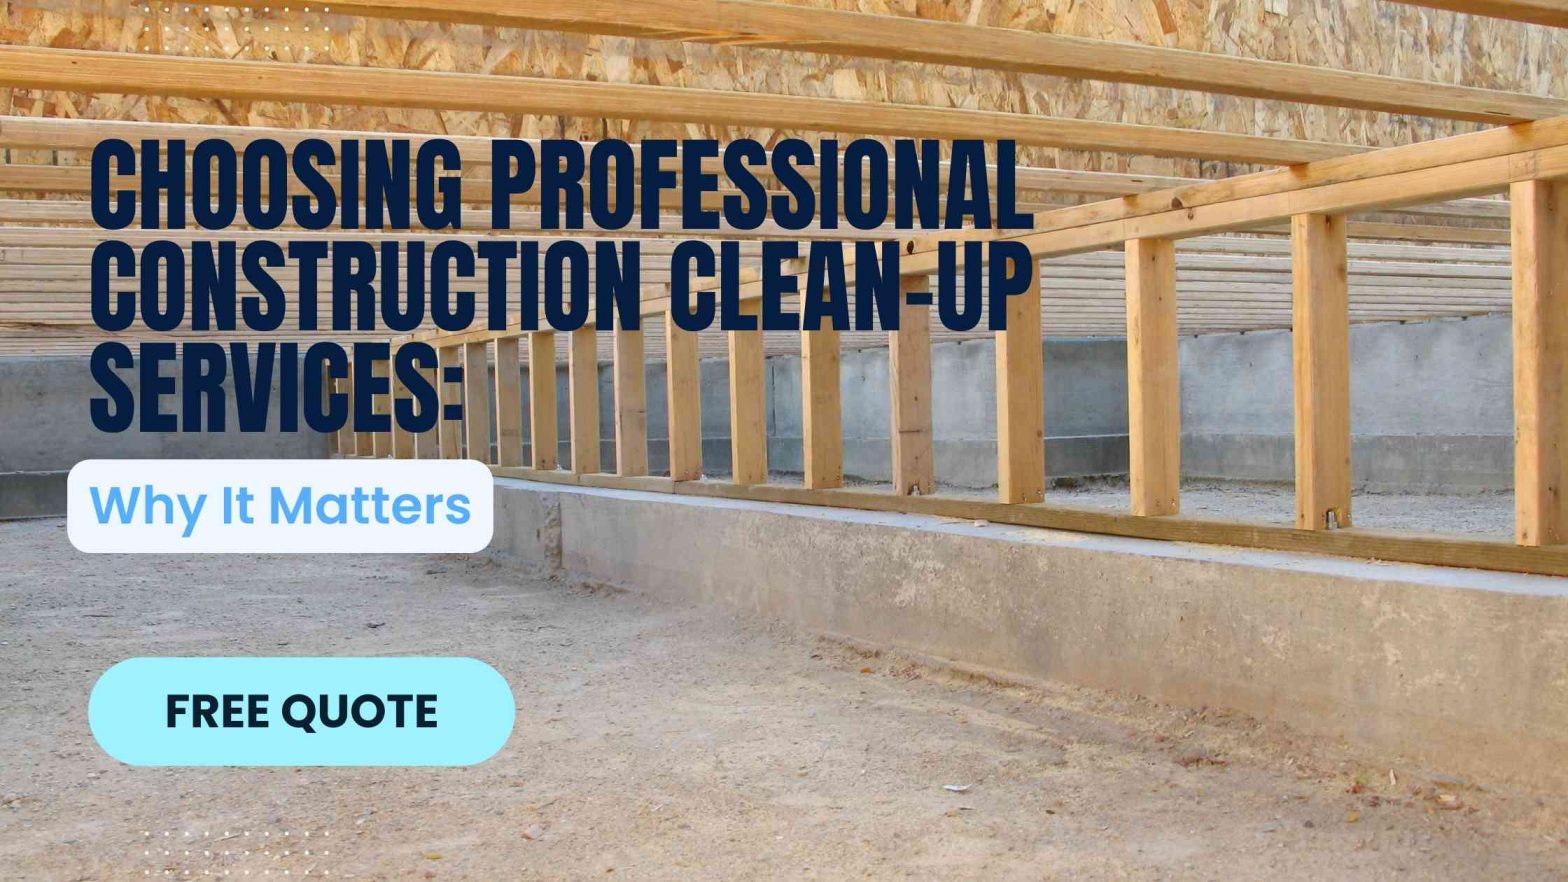 Professional Construction Clean-Up Services